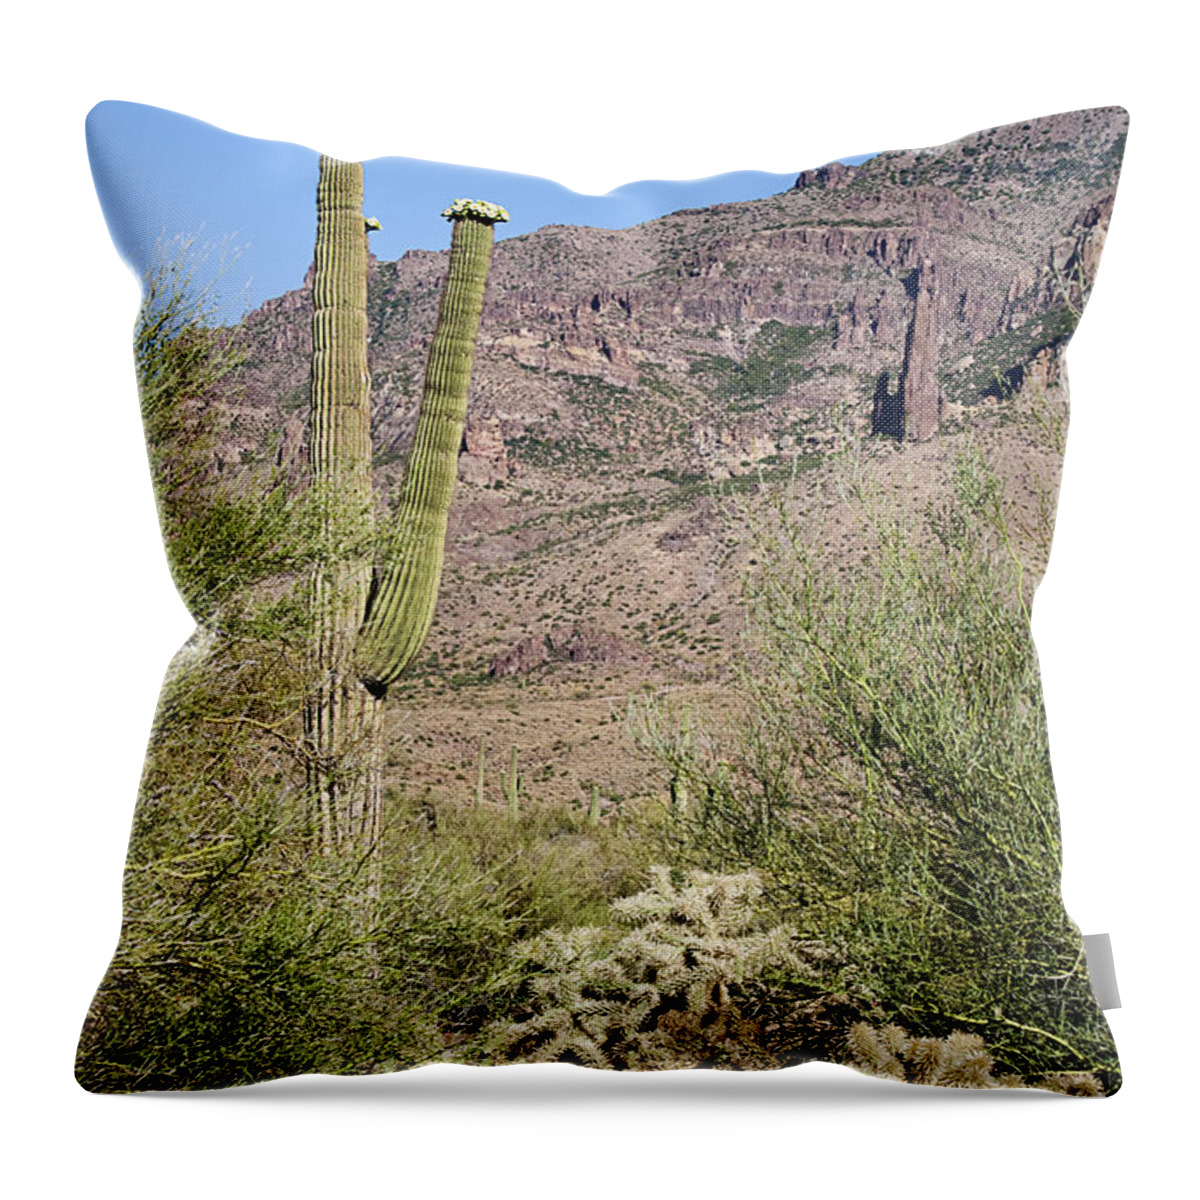 Landscape Throw Pillow featuring the photograph Greeting The Night by Phyllis Denton